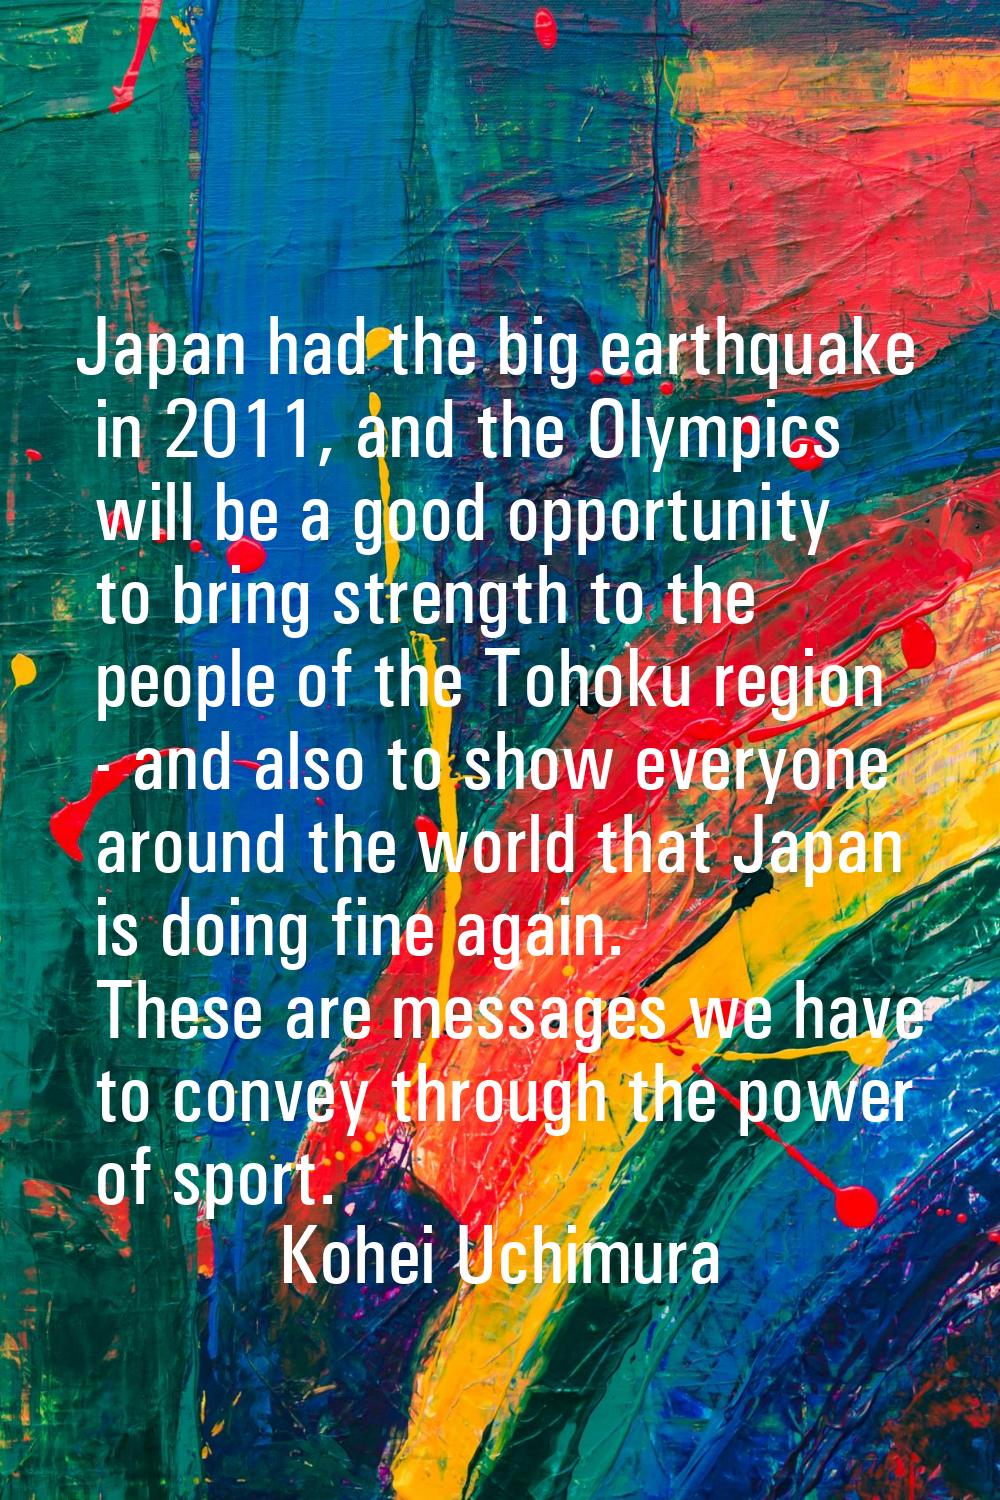 Japan had the big earthquake in 2011, and the Olympics will be a good opportunity to bring strength